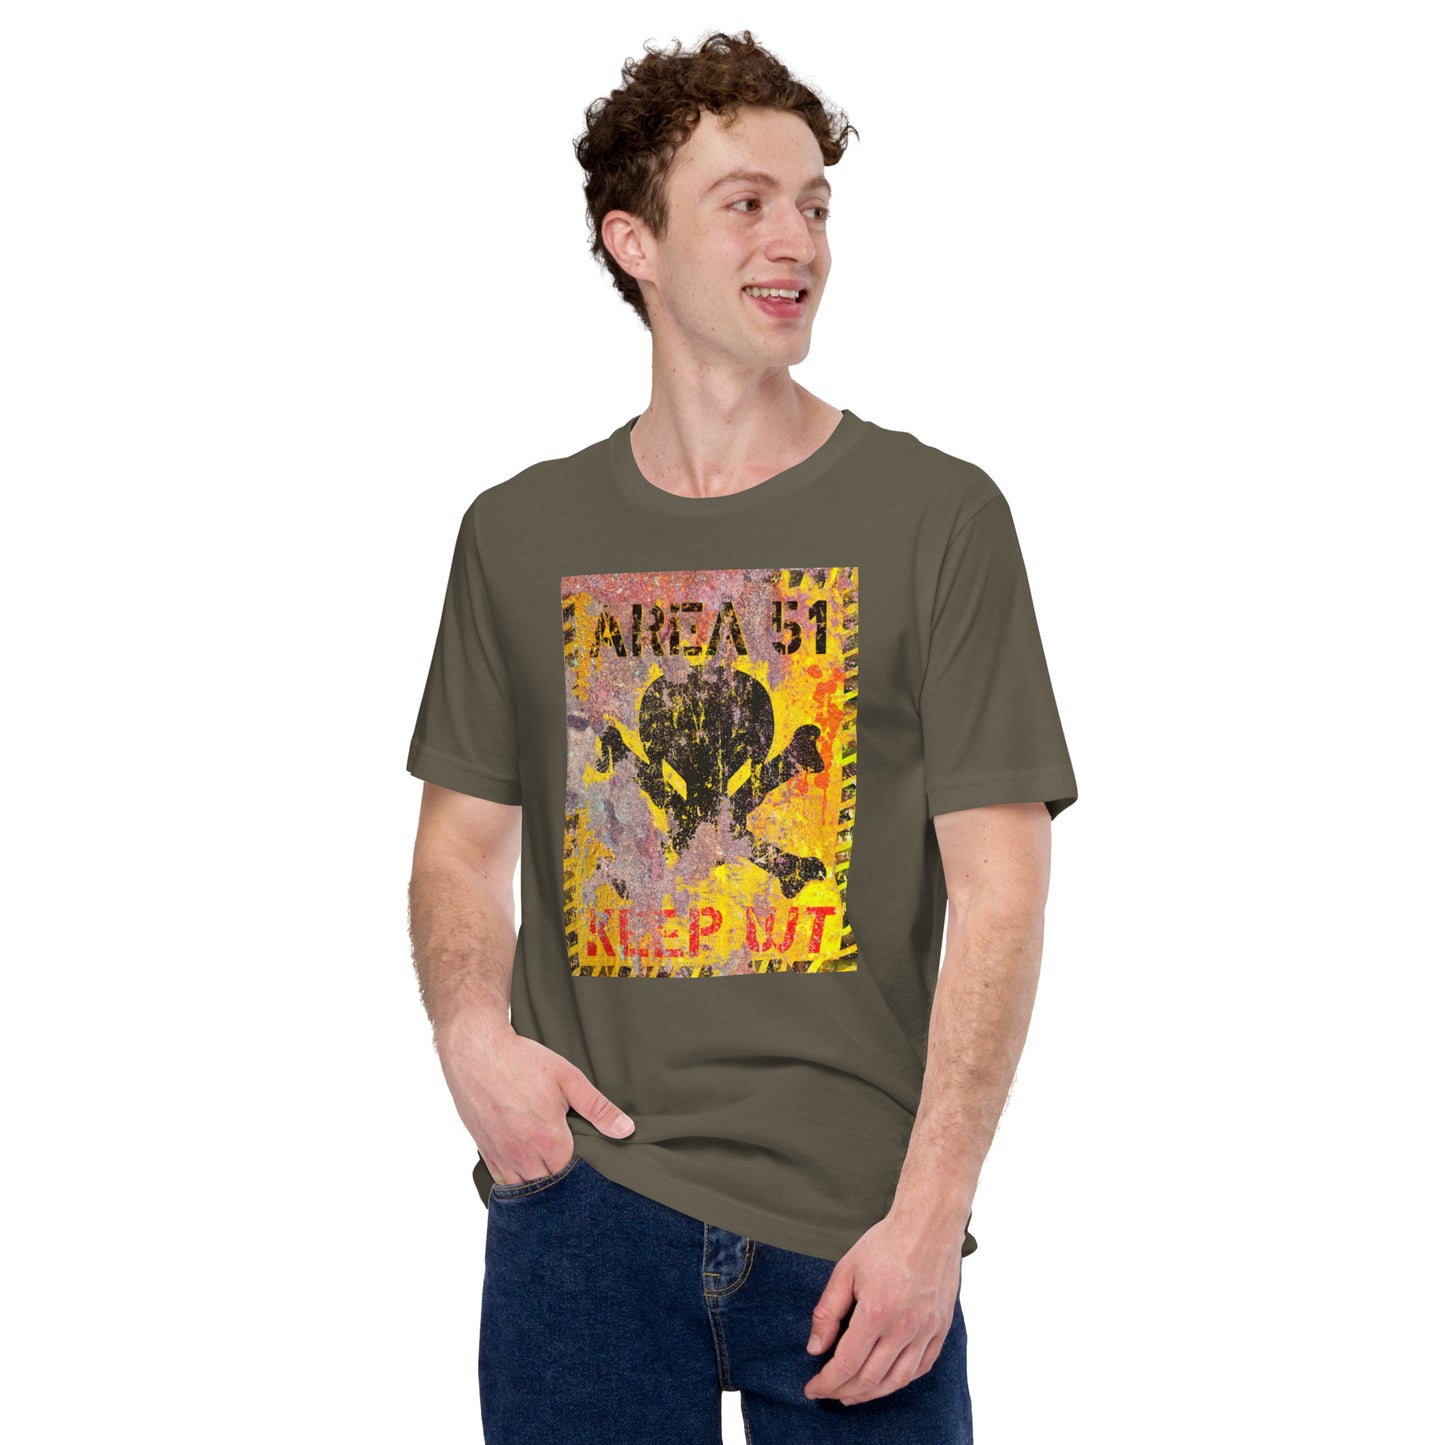 Area 51 Keep Out Unisex t-shirt